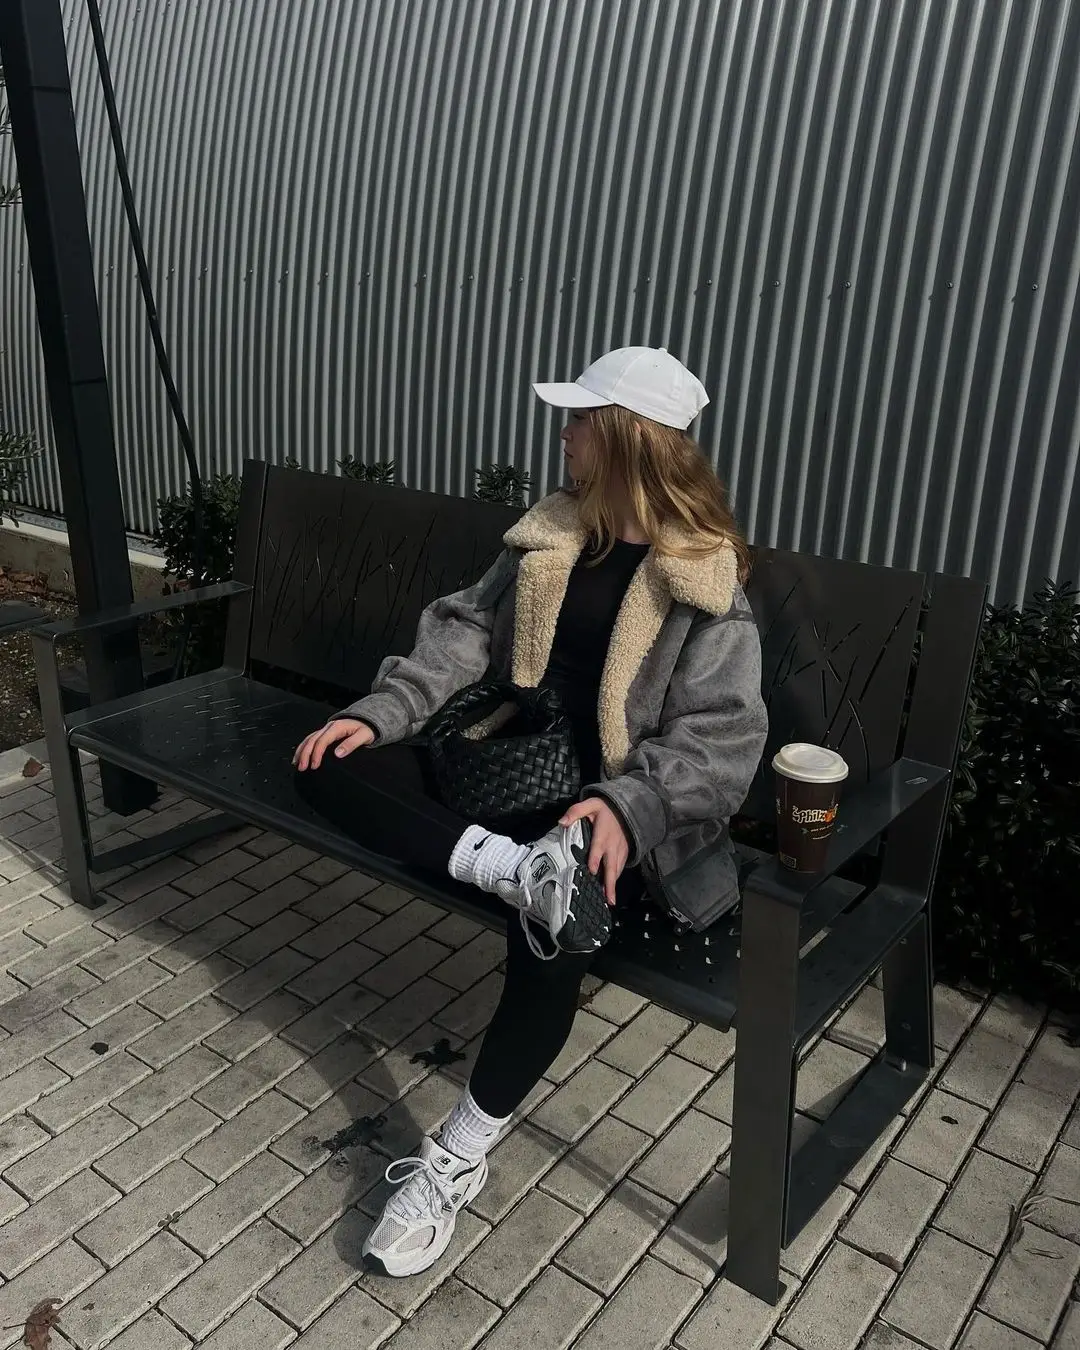 Girl siting wearing a fashionable gym outfit with white hat, leggings and a wool jacket